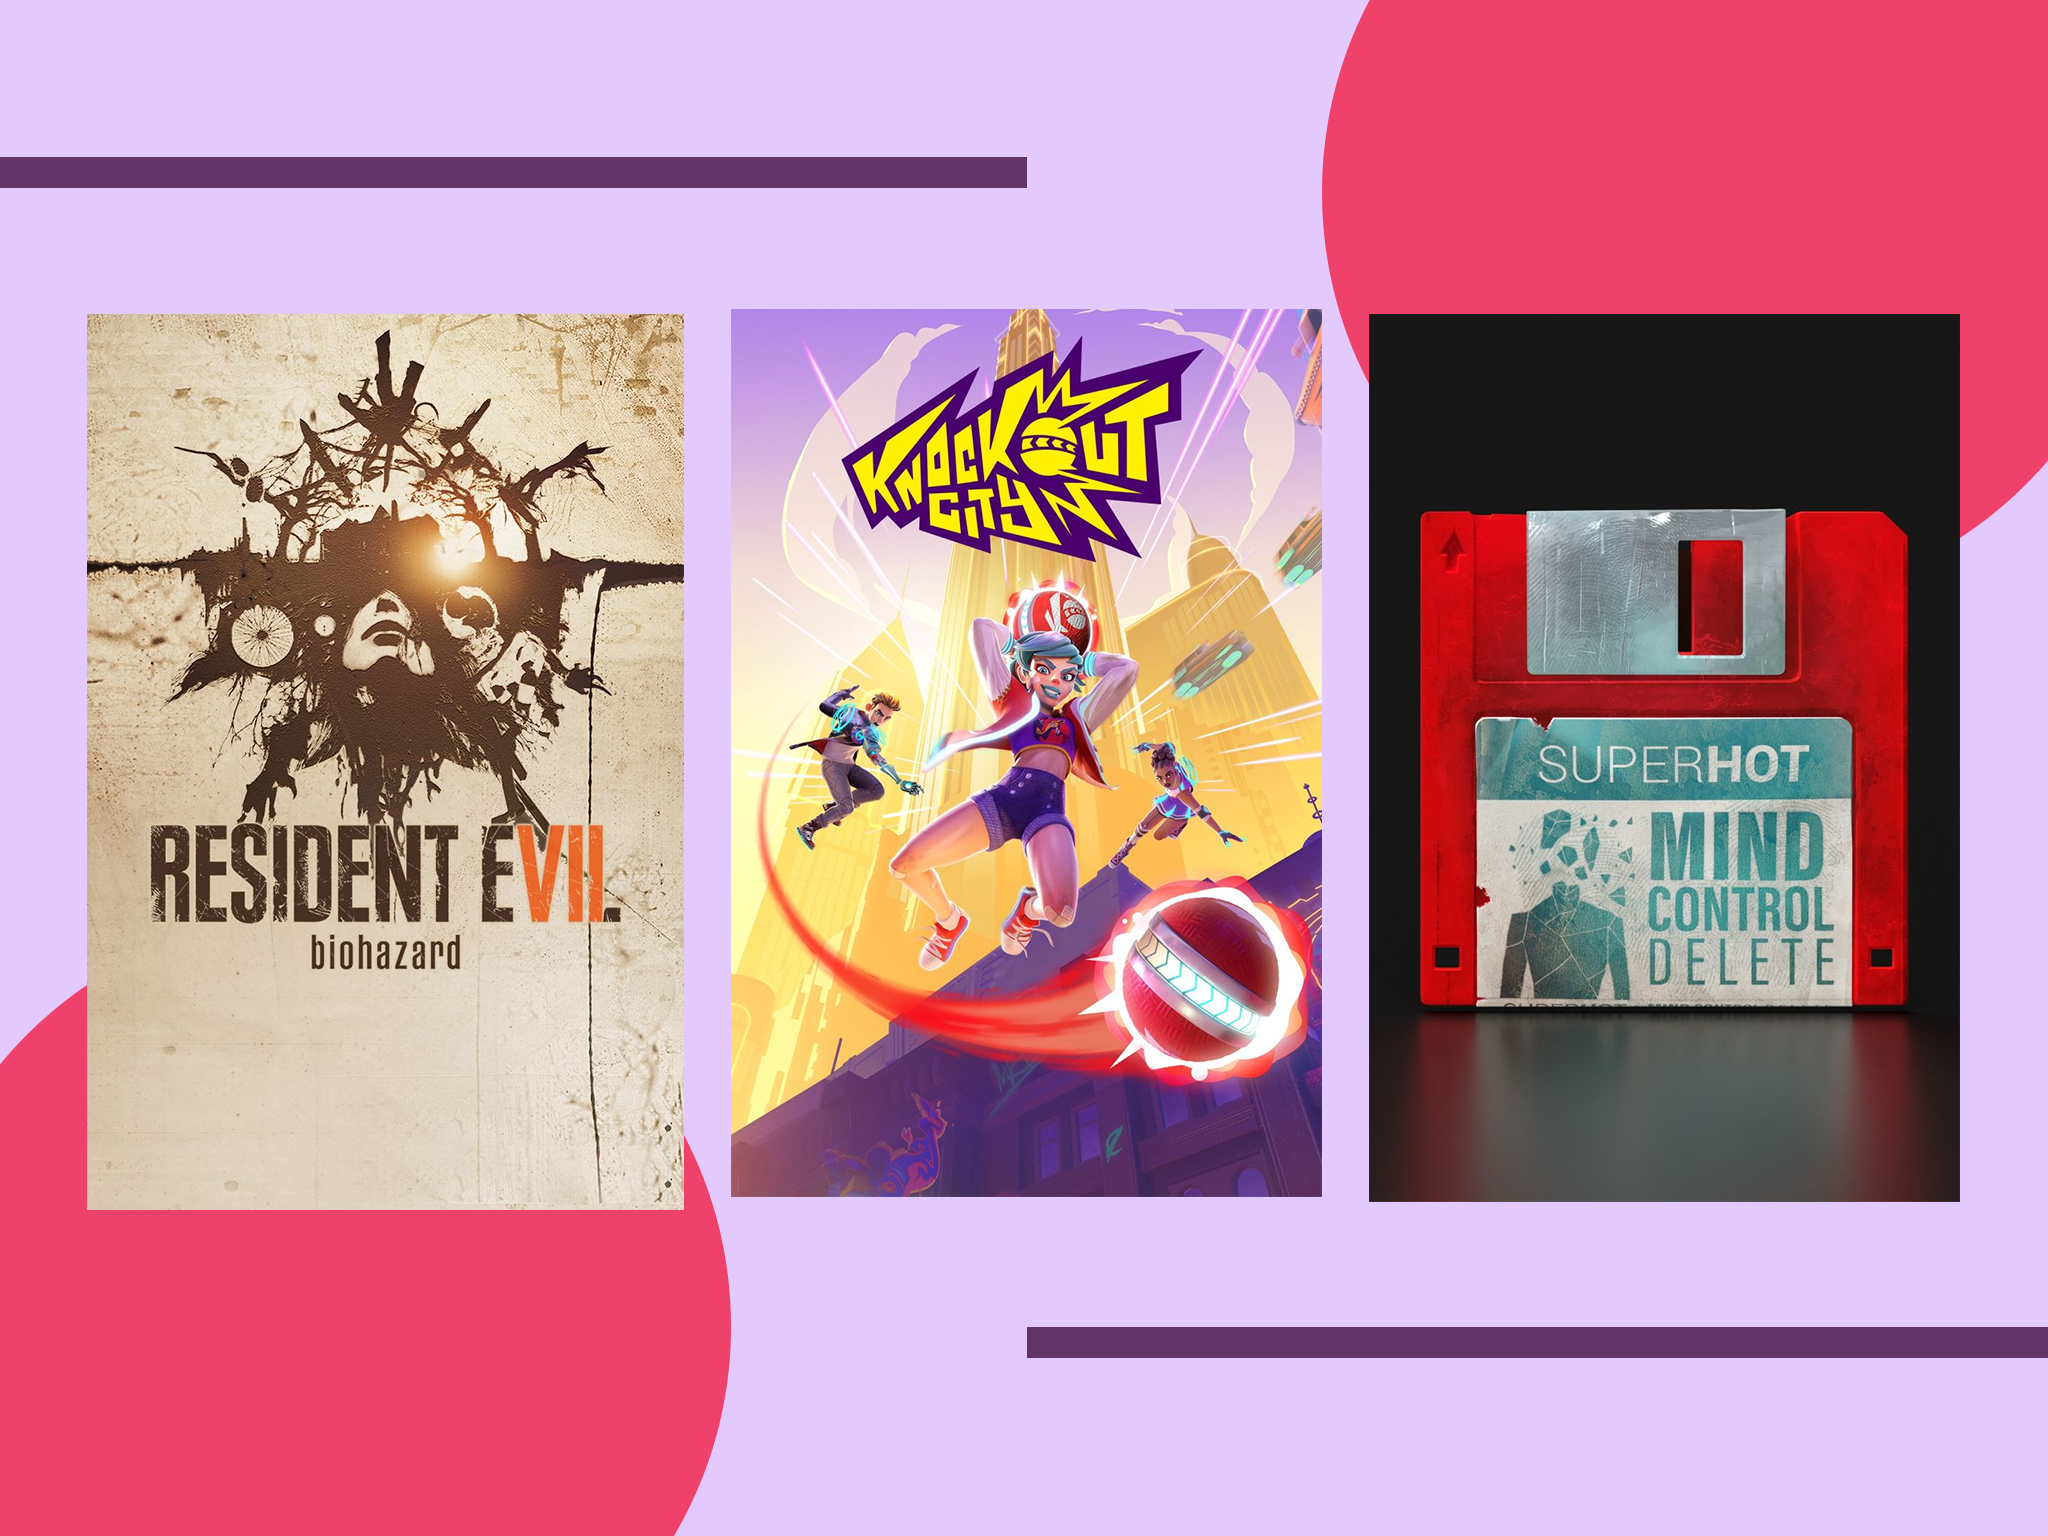 Last chance to try these titles at no extra cost